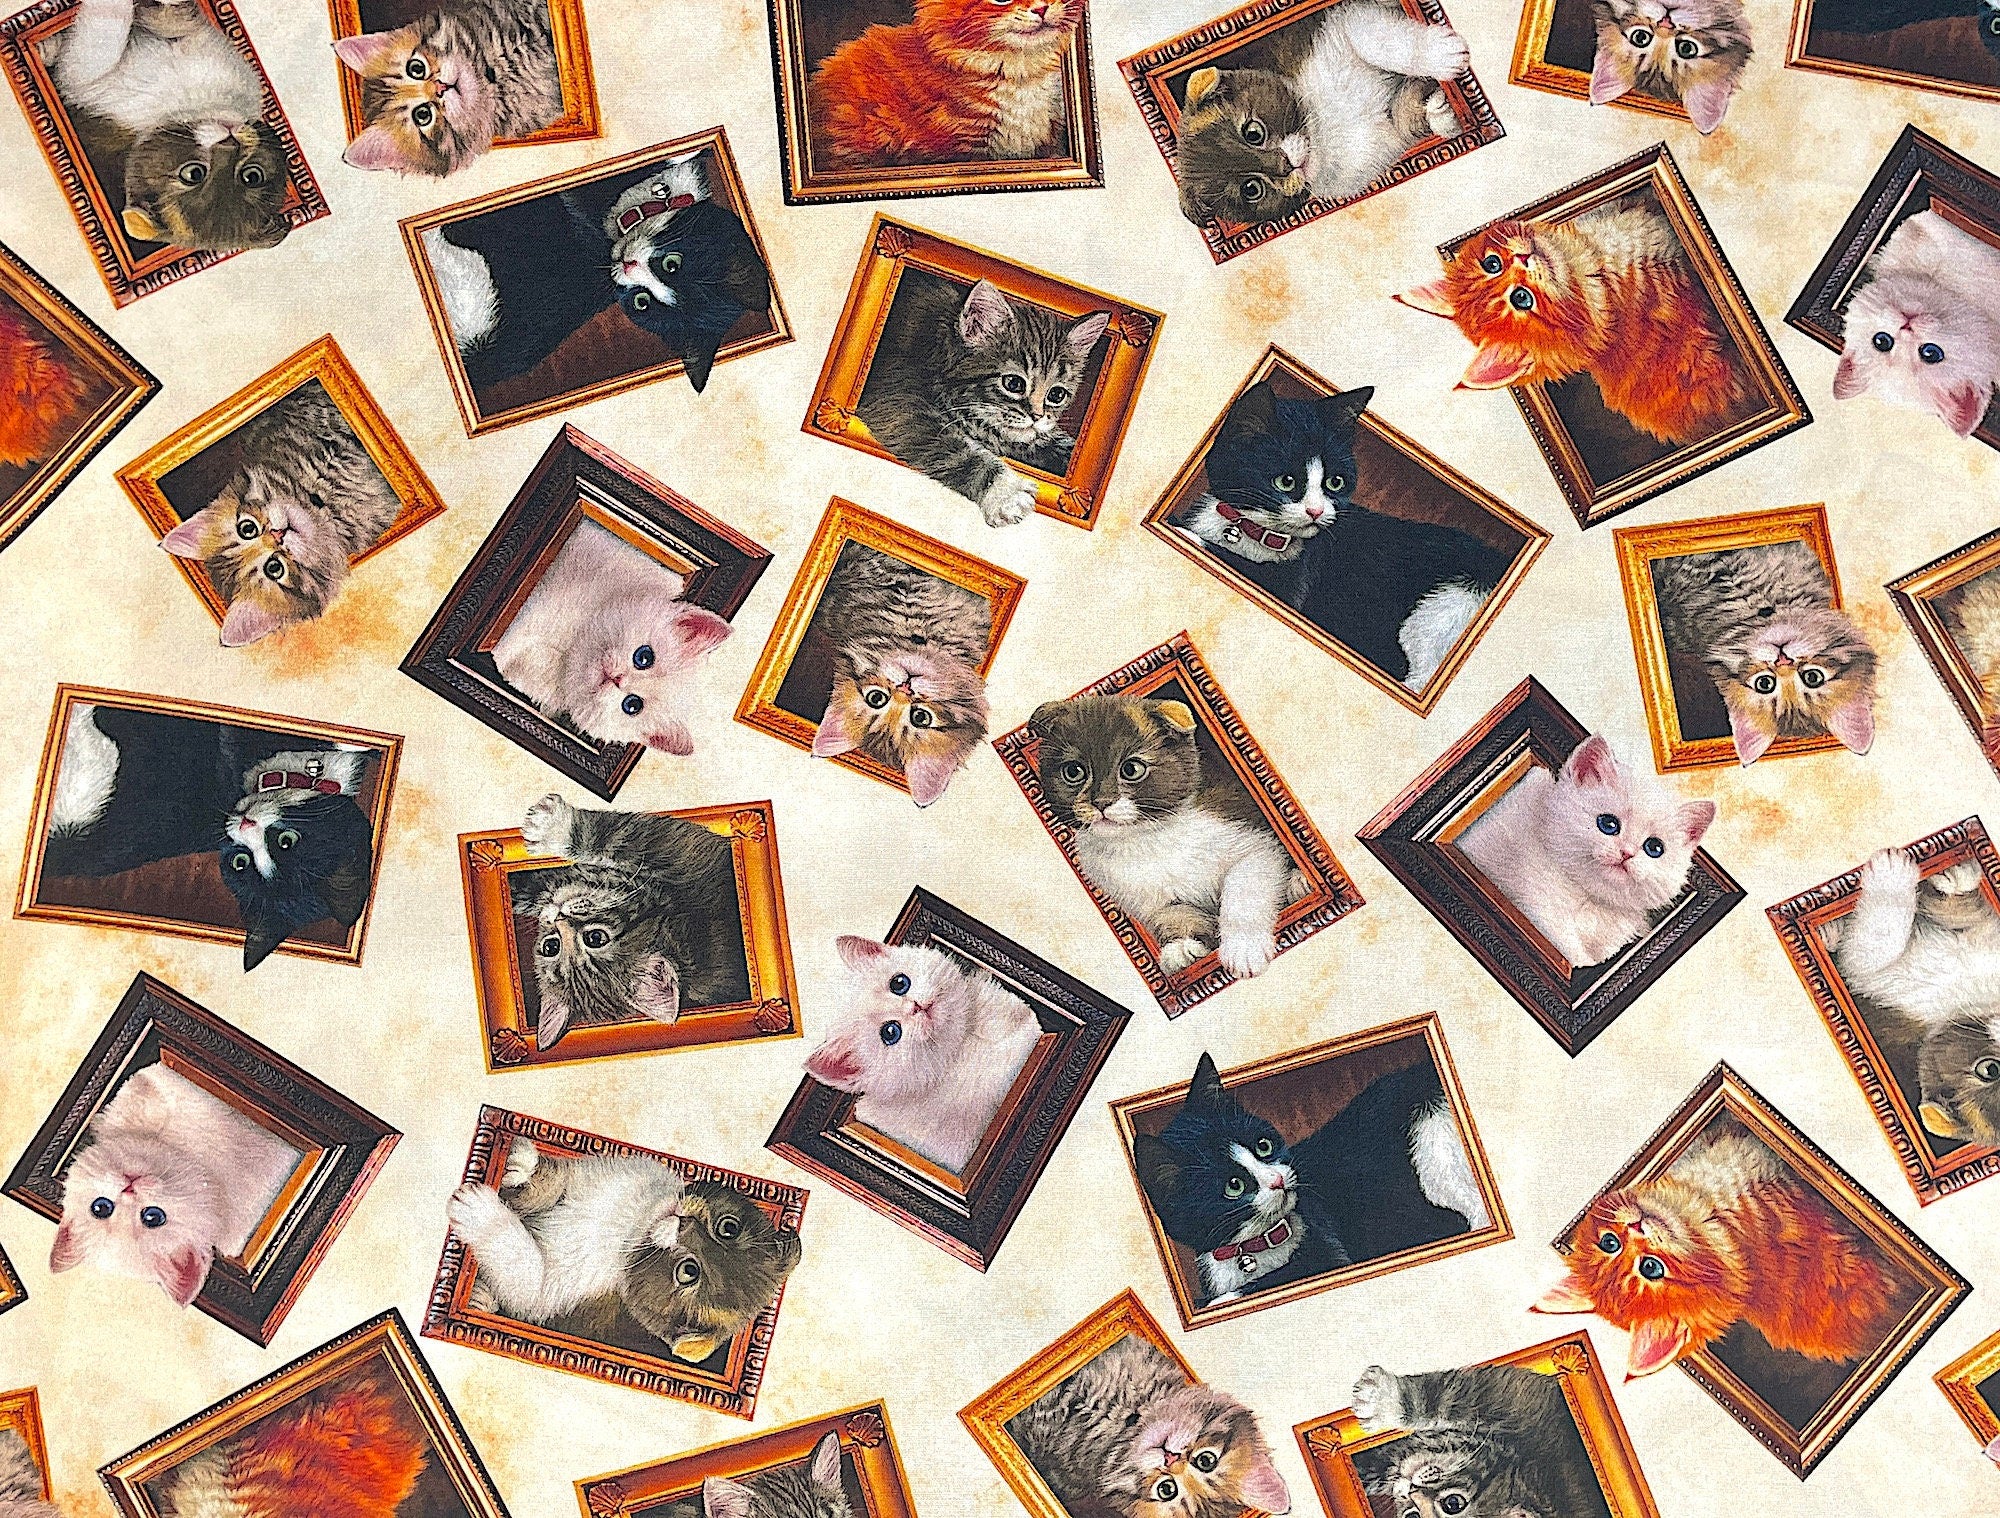 Lots of cats in frames.